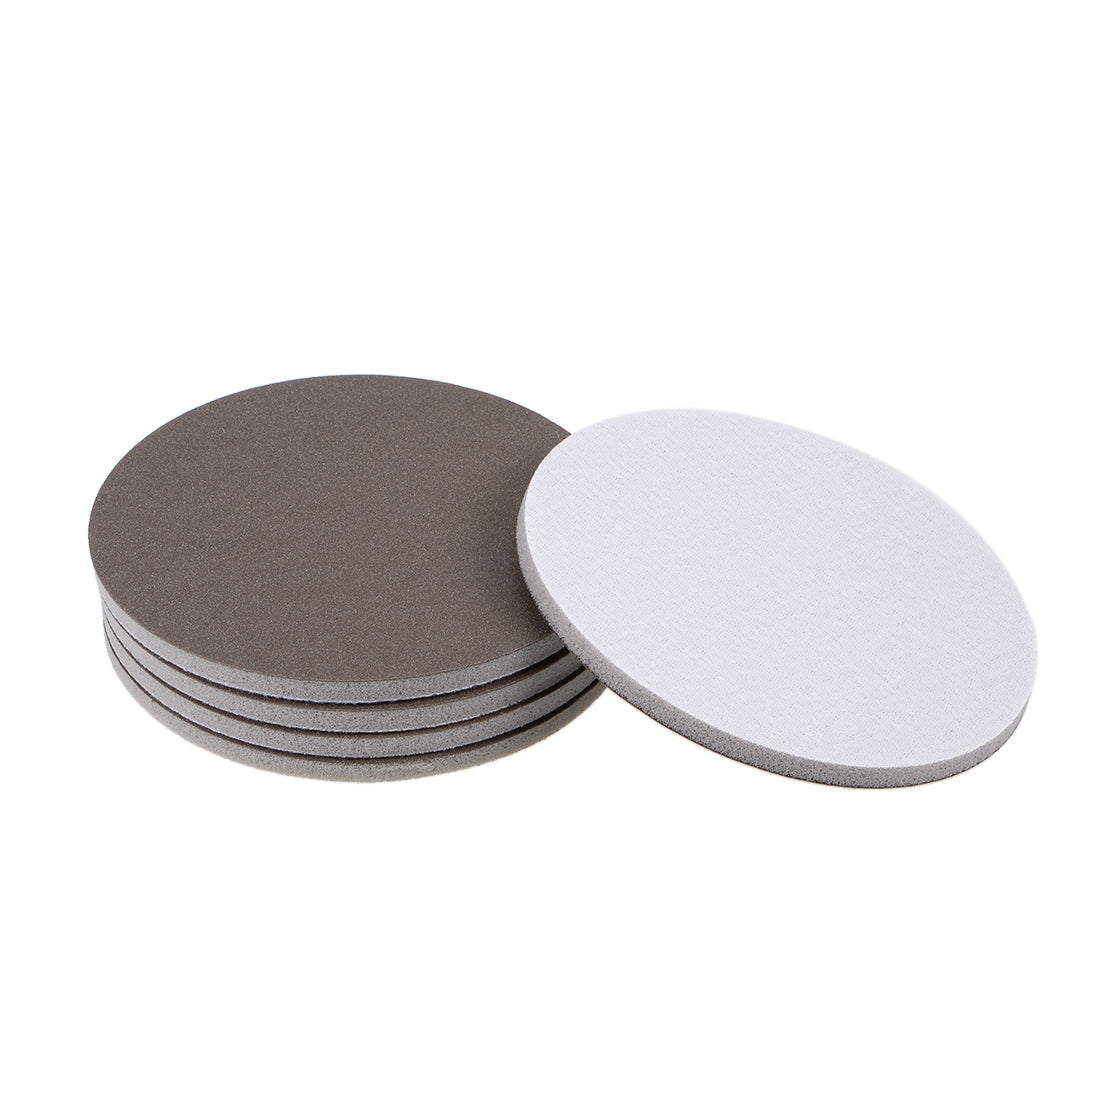 uxcell Uxcell 4-Inch 600-Grits Hook and Loop Sanding Disc, Sponge Sanding Pad Wet Dry Aluminum Oxide Sandpaper for Polishing & Grinding 5pcs